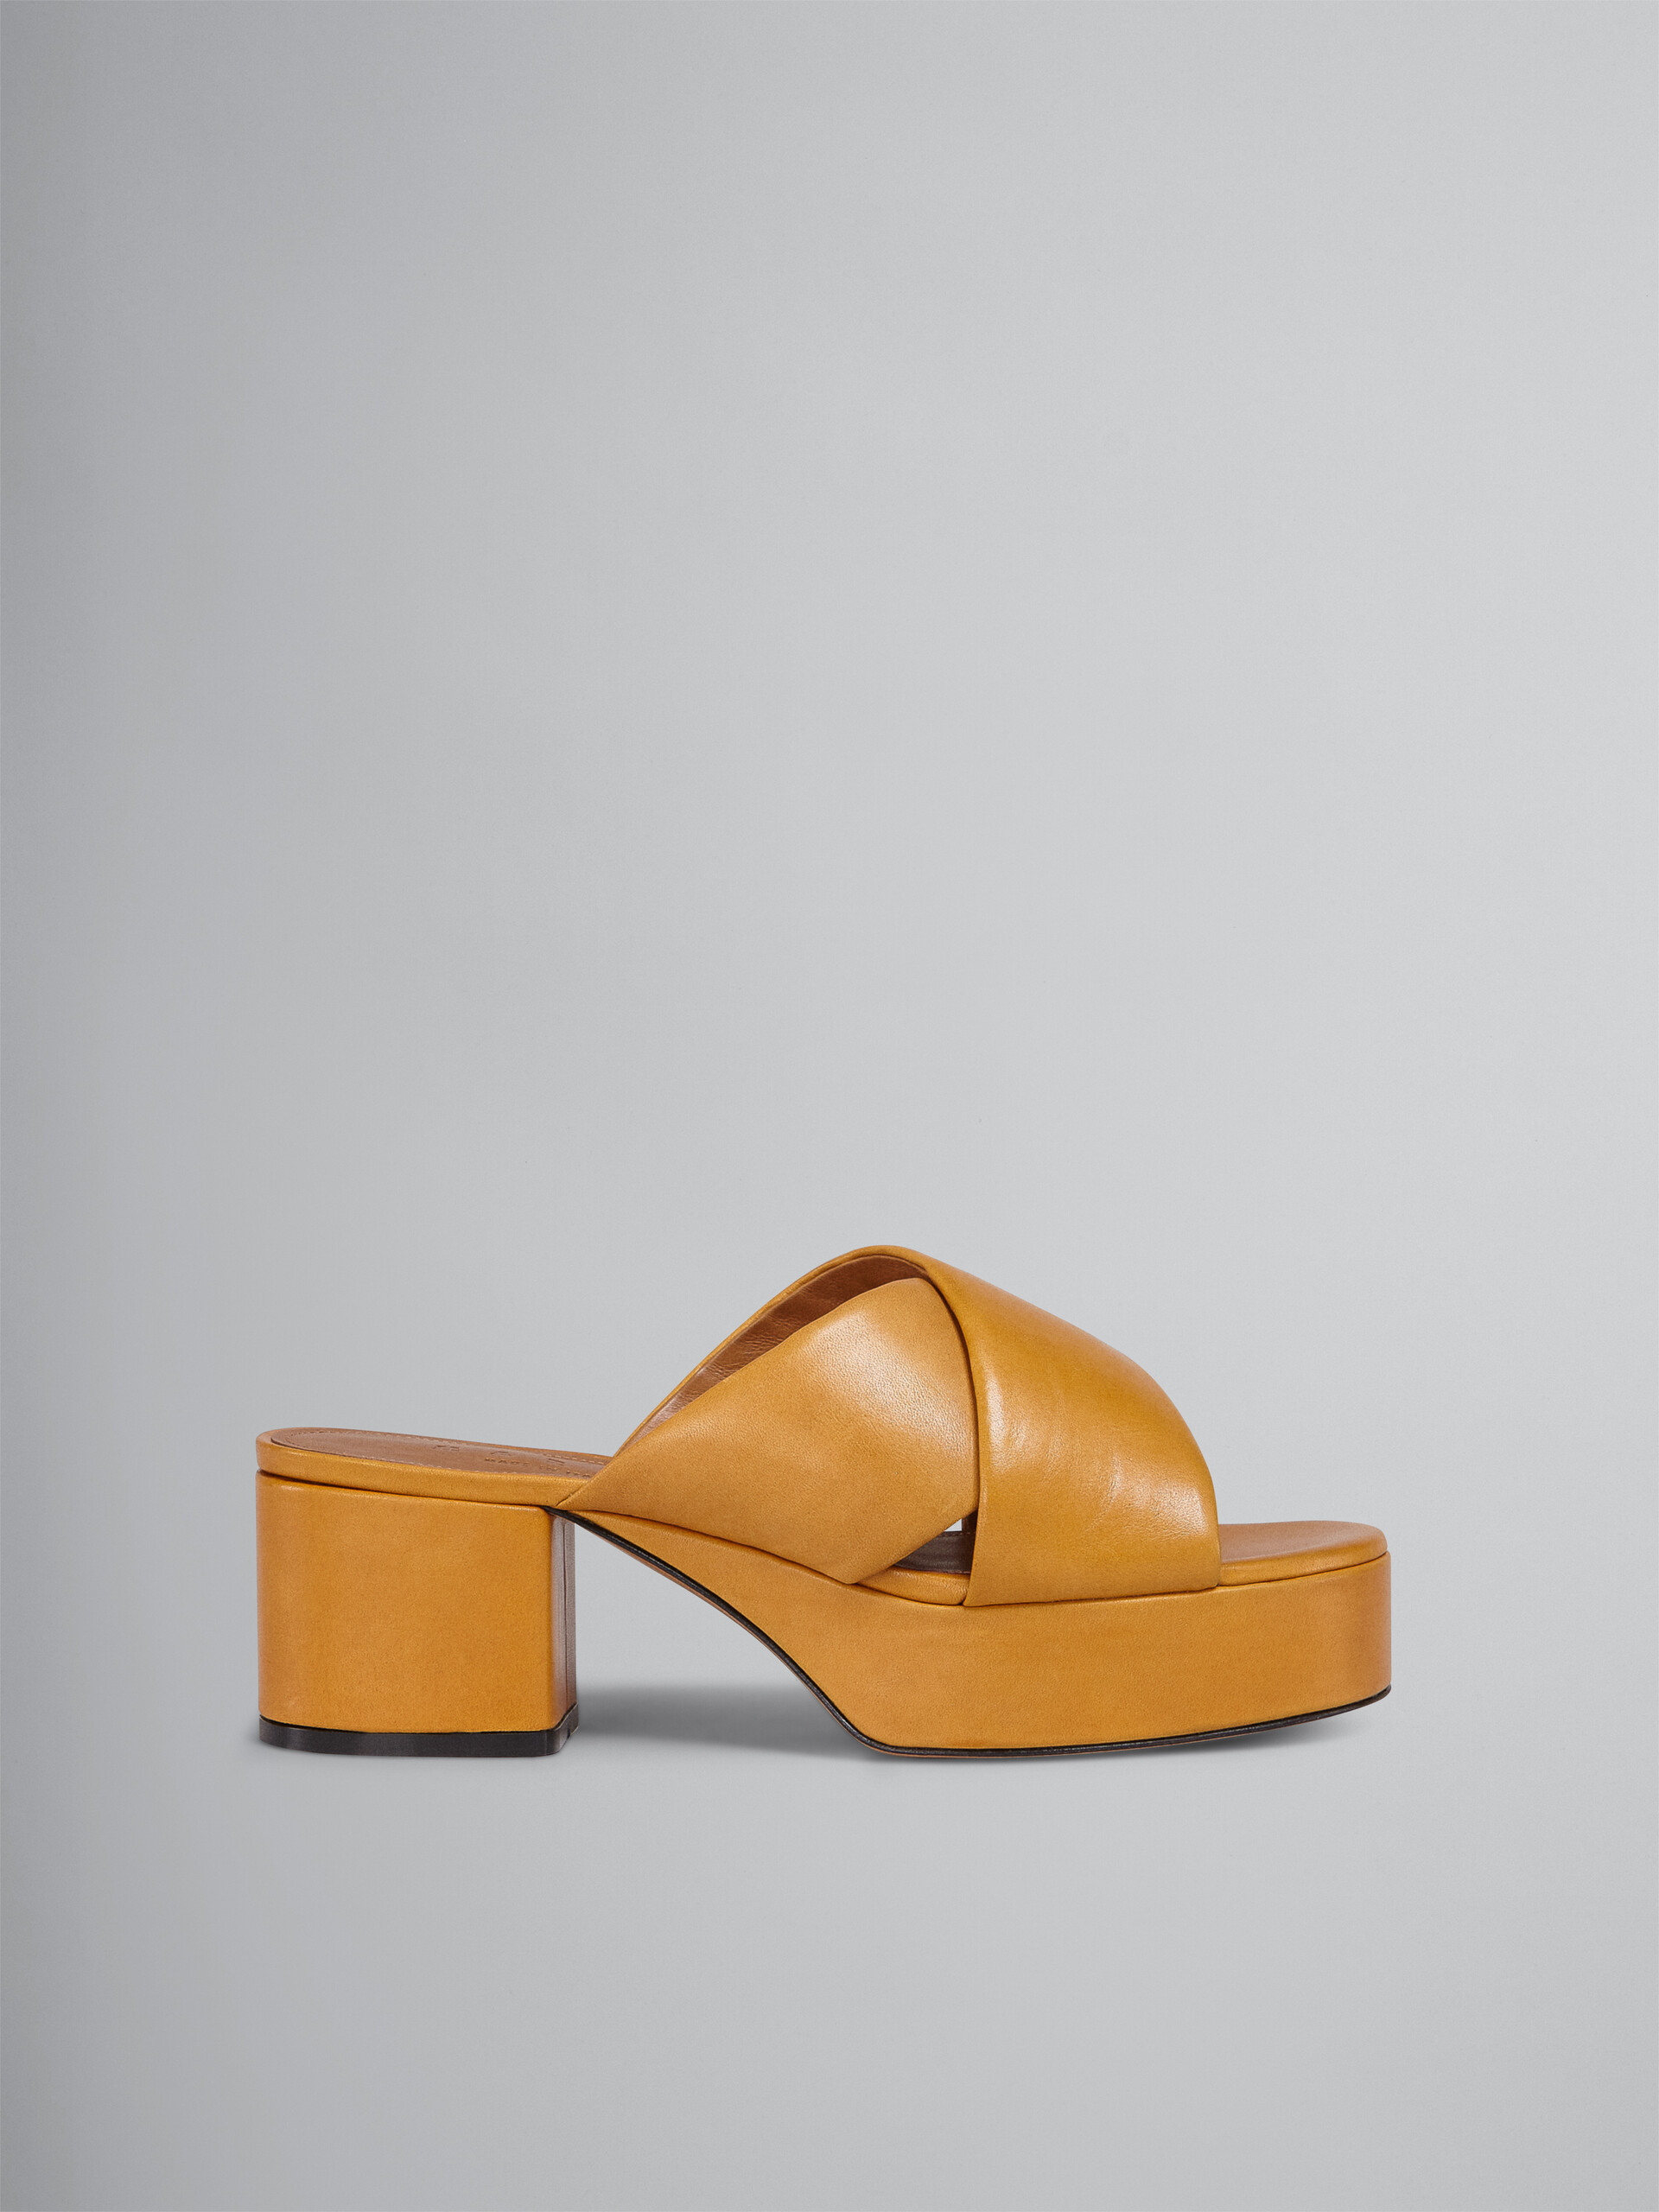 Yellow vegetable-tanned leather sandal - Sandals - Image 1